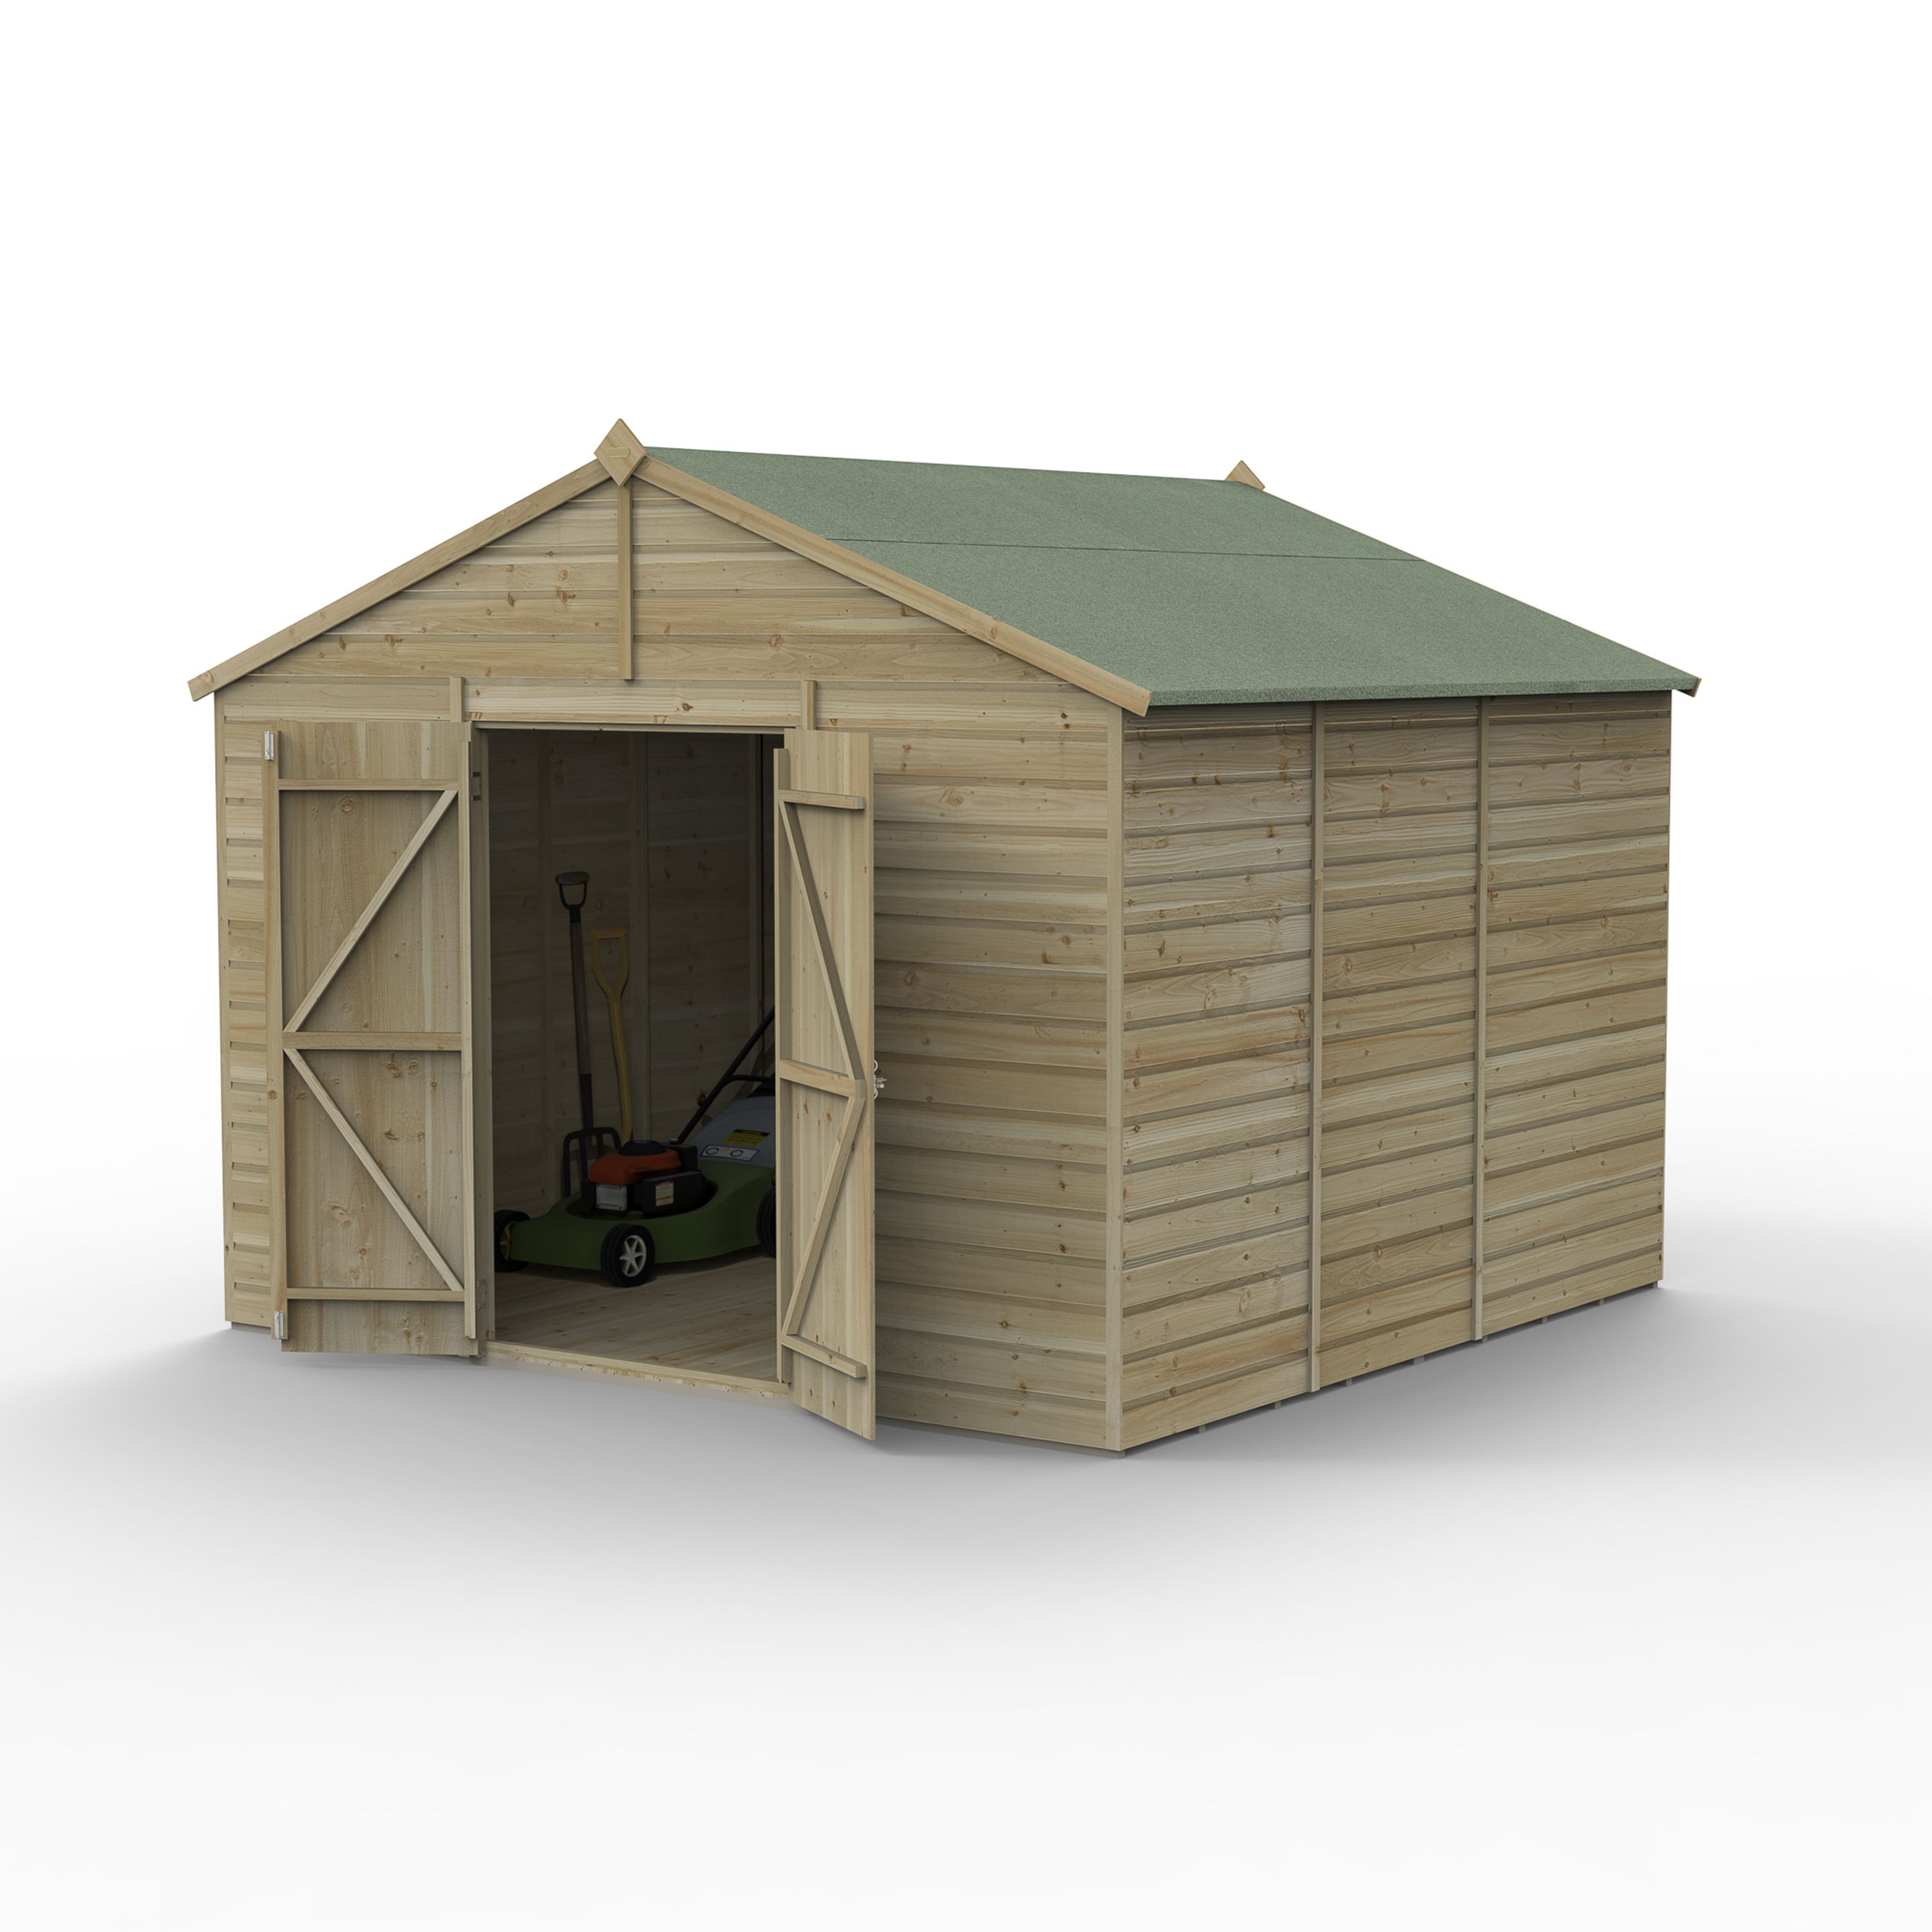 Forest Garden Beckwood 10x10 ft Apex Natural timber Wooden 2 door Shed with floor (Base included)